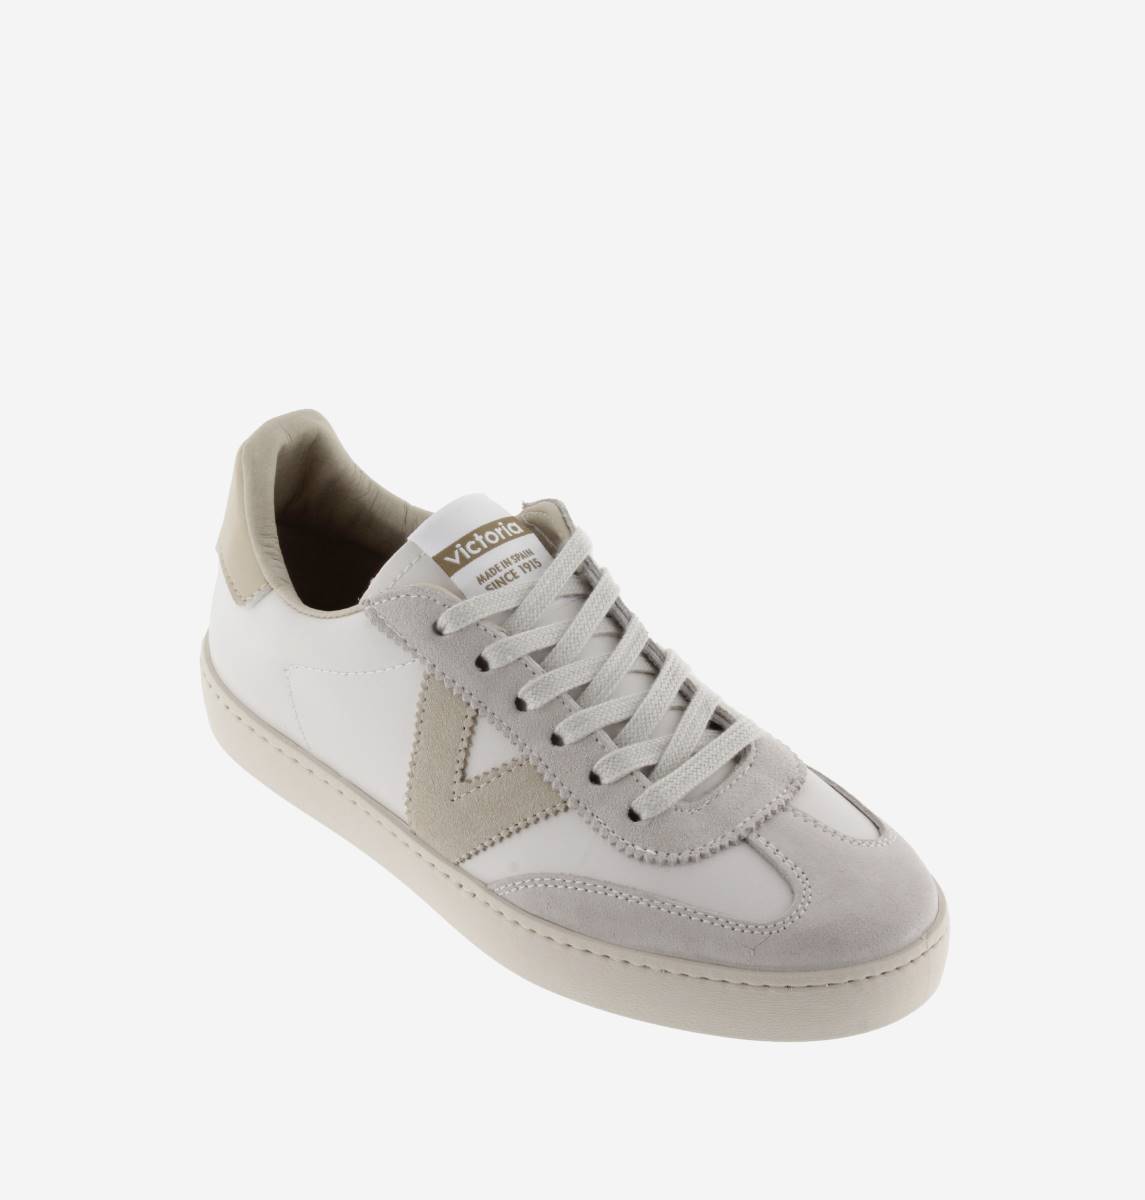 Victoria Trainers Berlin Ciclista Grey Womens trainers 1126184-00